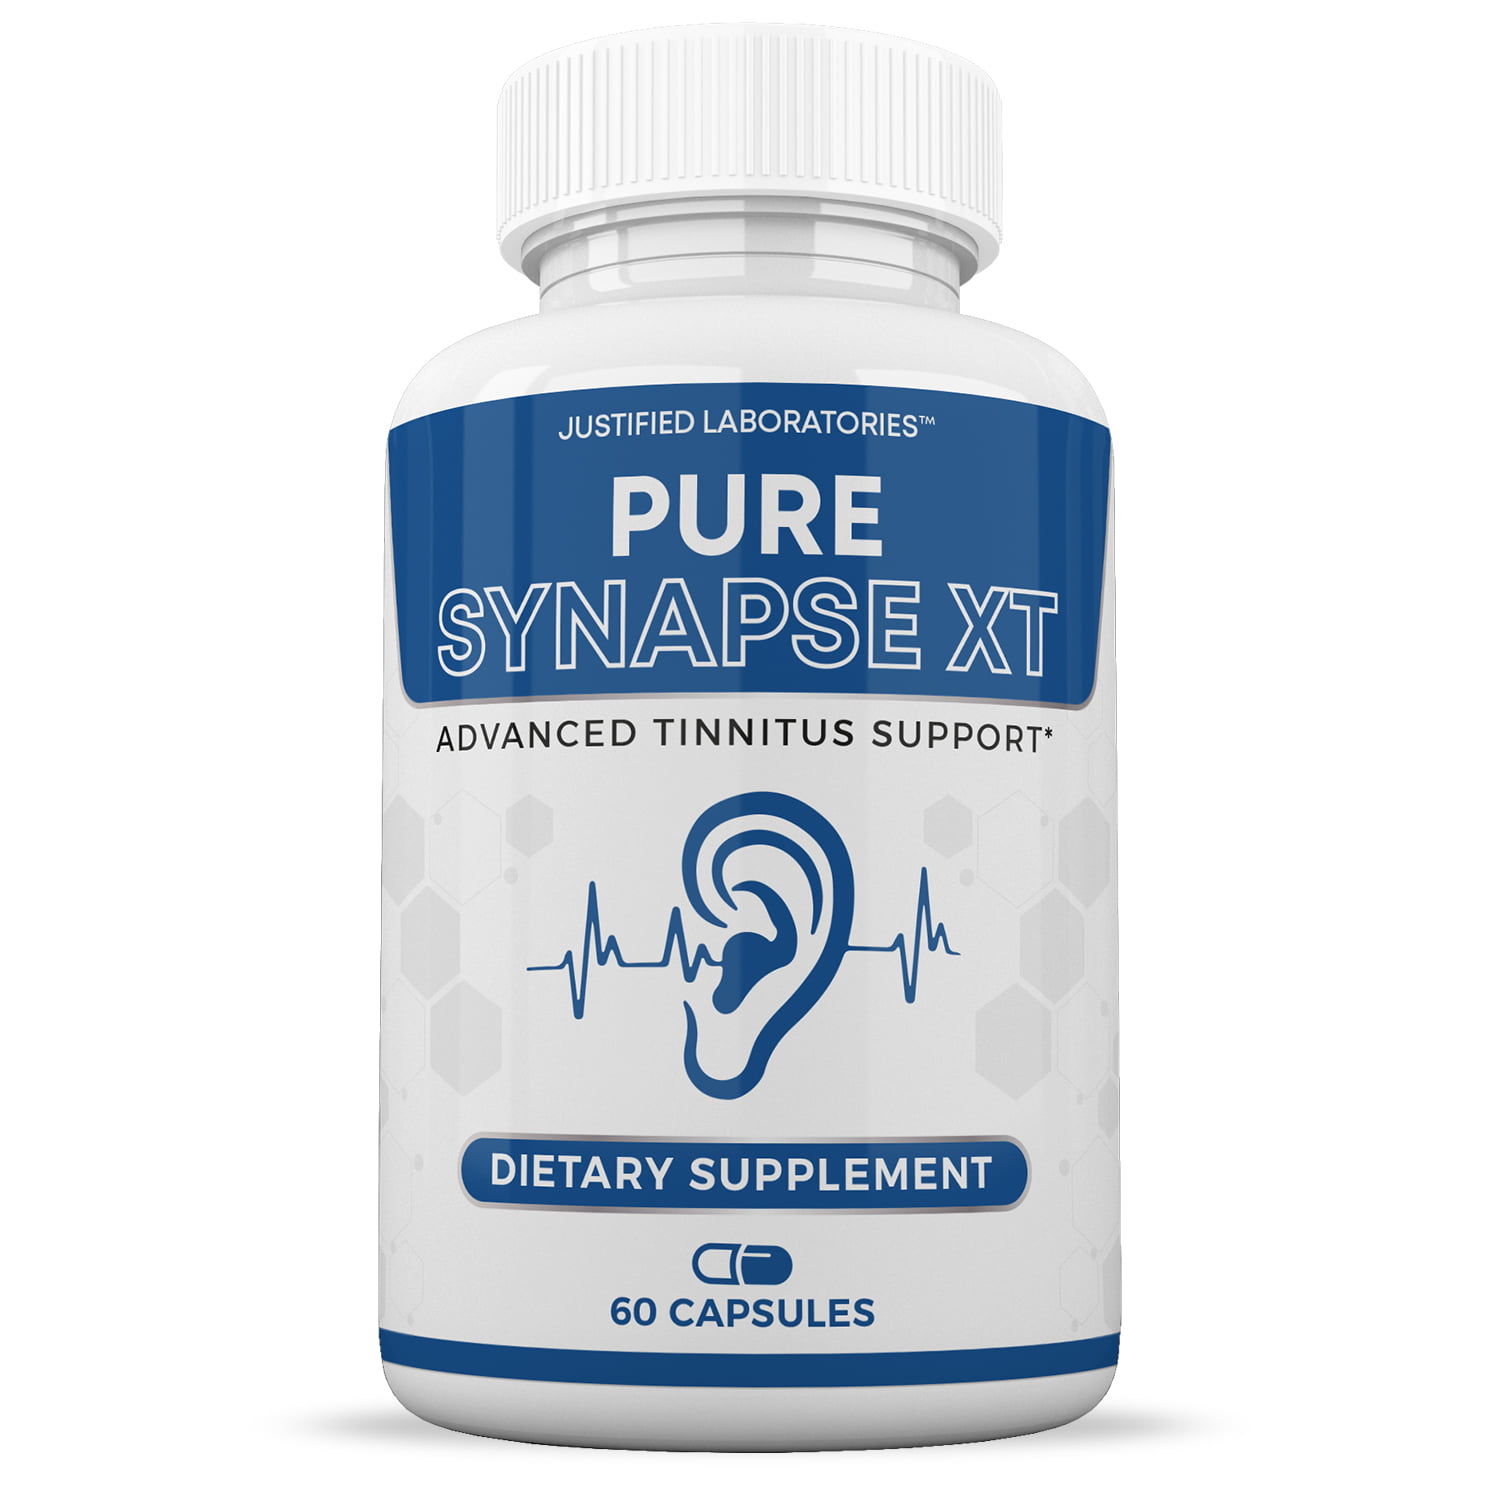 Synapse XT for Tinnitus Supplement Pills- Does this Product Really Work?